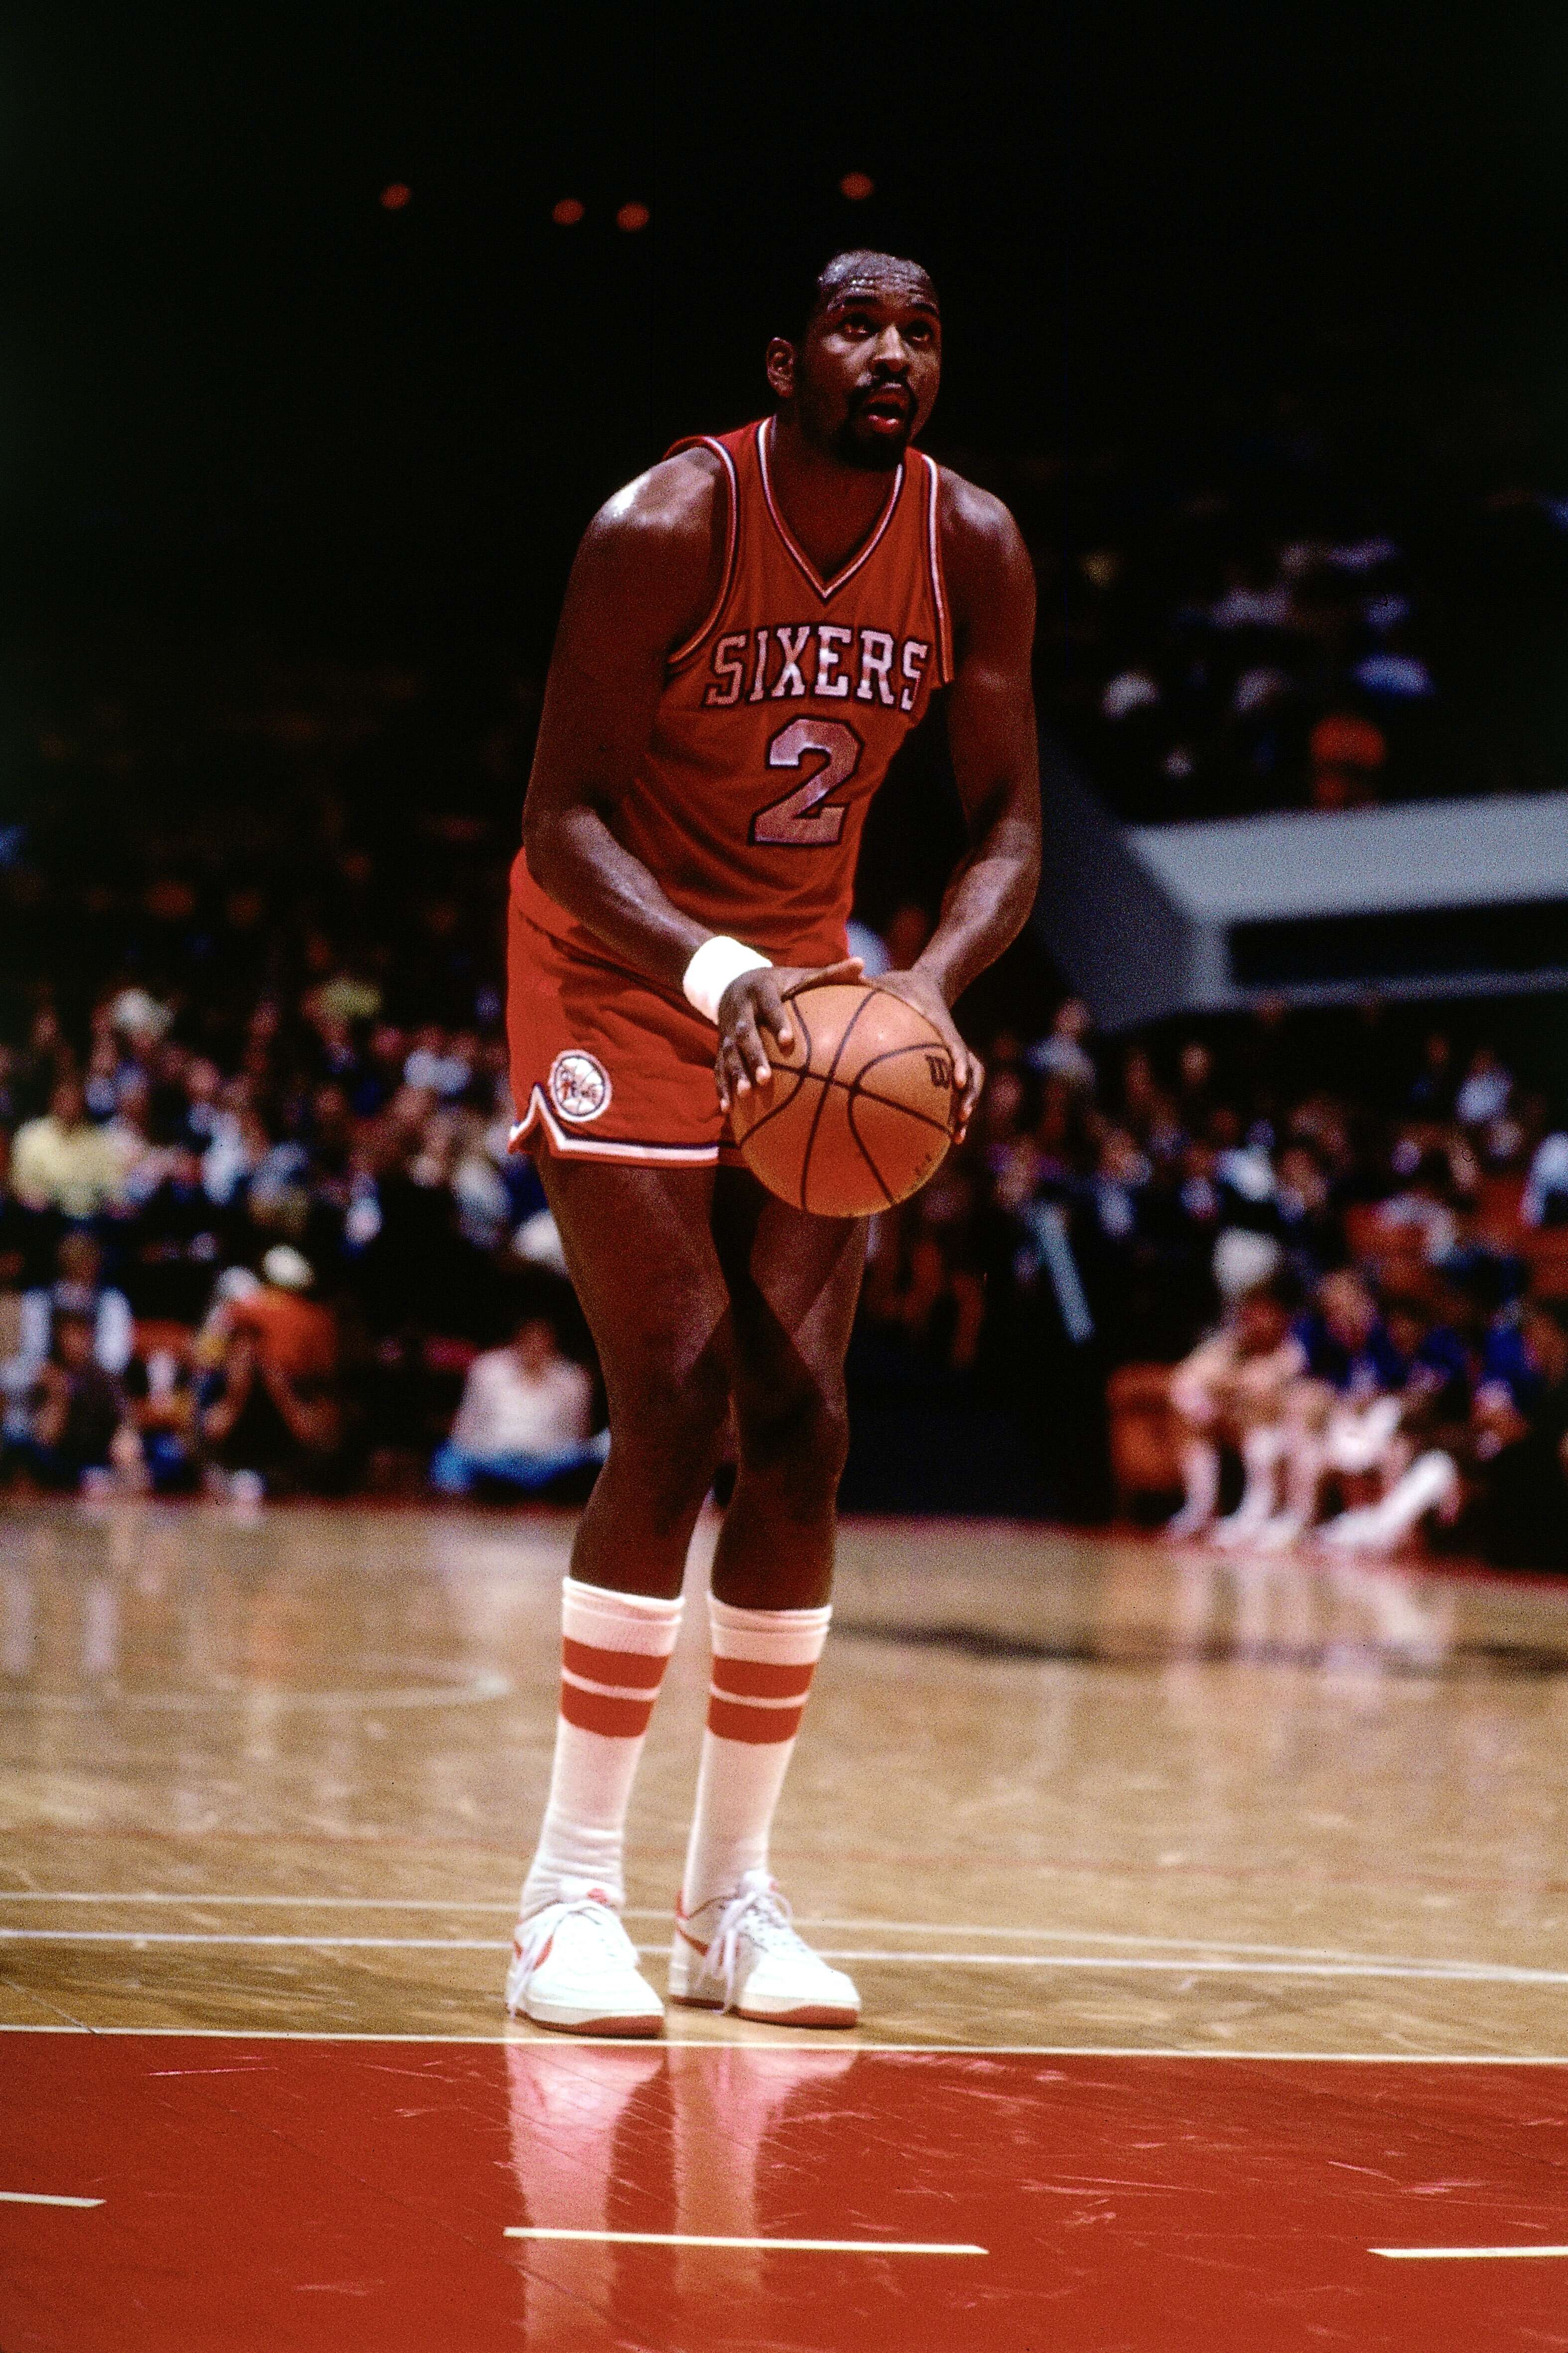 Moses Malone shoots a free throw against the Atlanta Hawks at The Omni during the 1983 NBA season | Photo: Getty Images